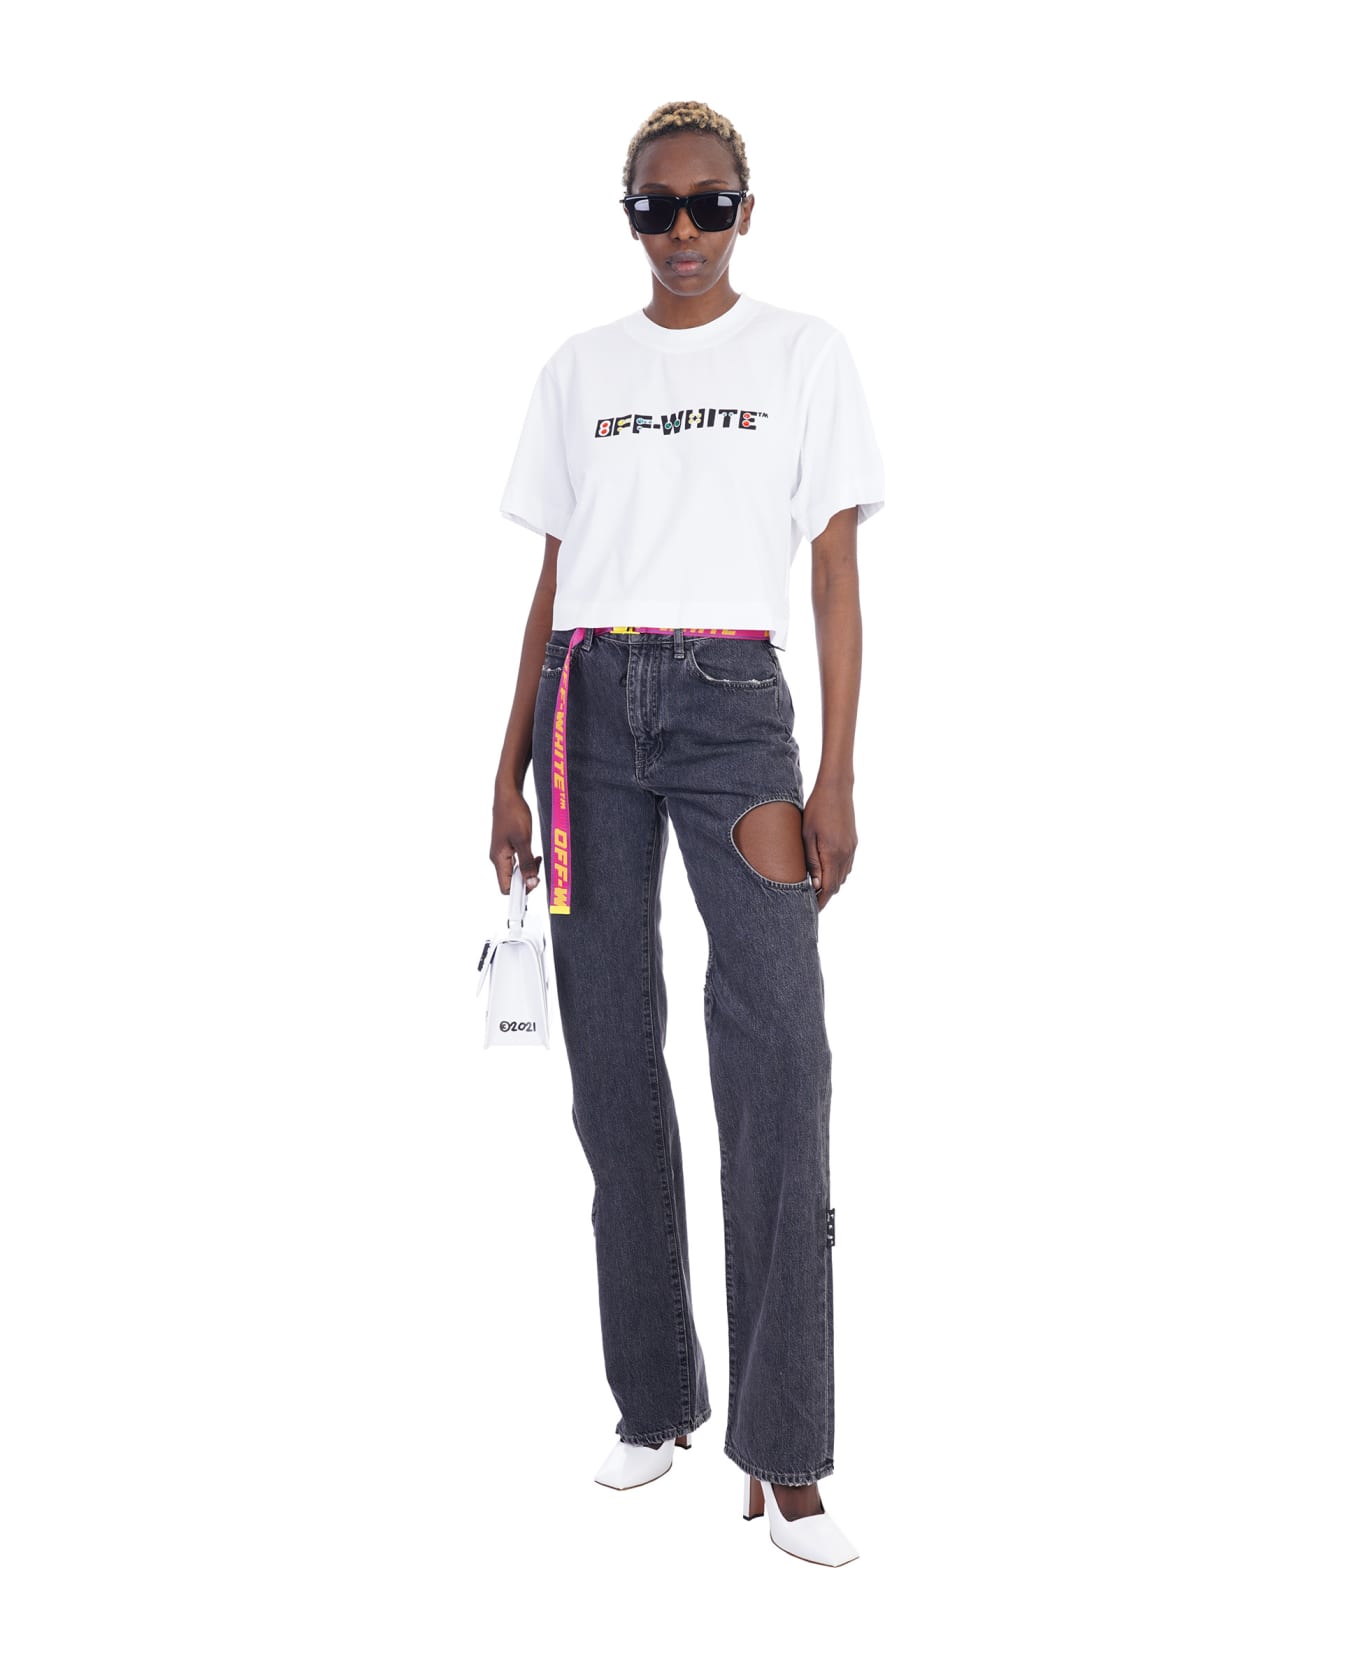 Off-White Jeans In Grey Cotton - grey